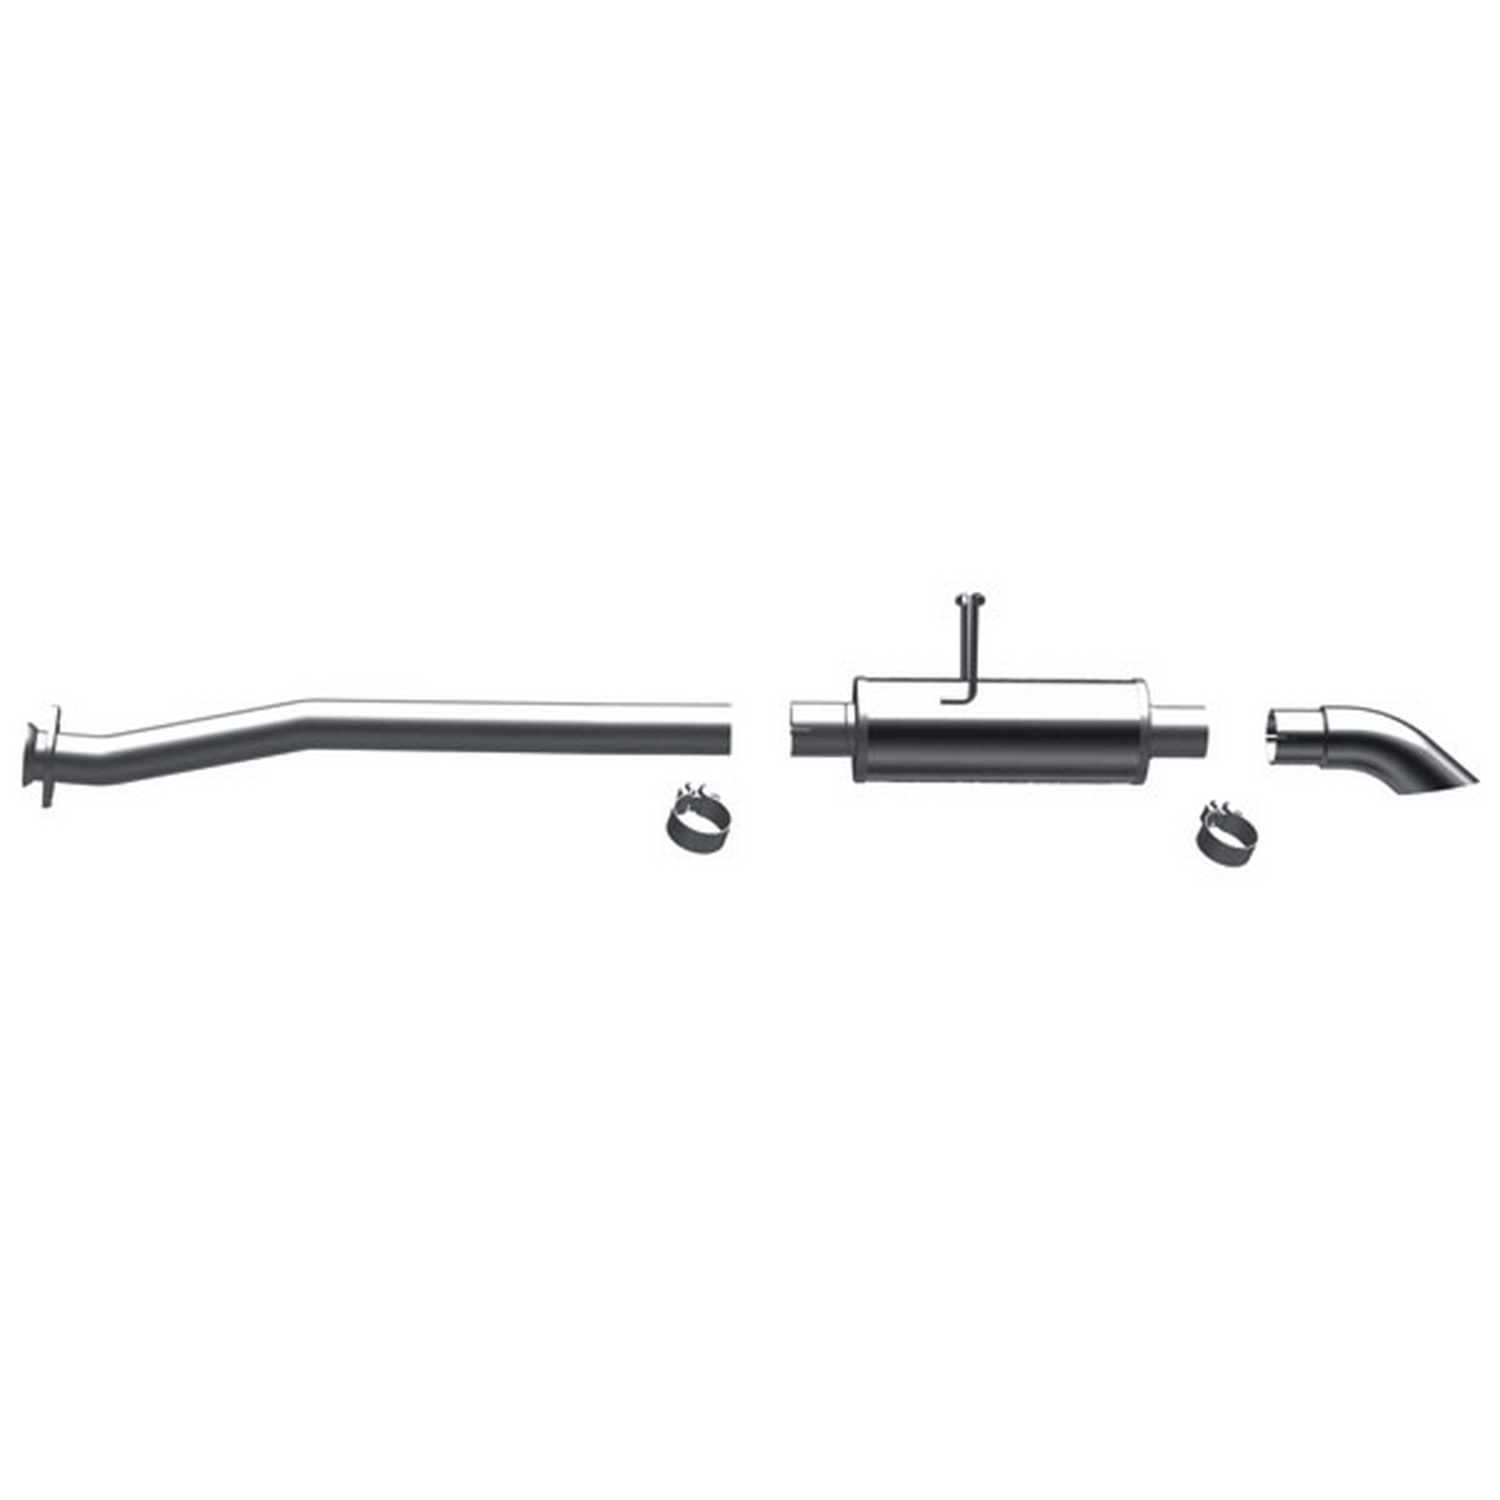 Magnaflow Performance Exhaust Magnaflow Performance Exhaust 17114 Off Road Pro Series Cat-Back System